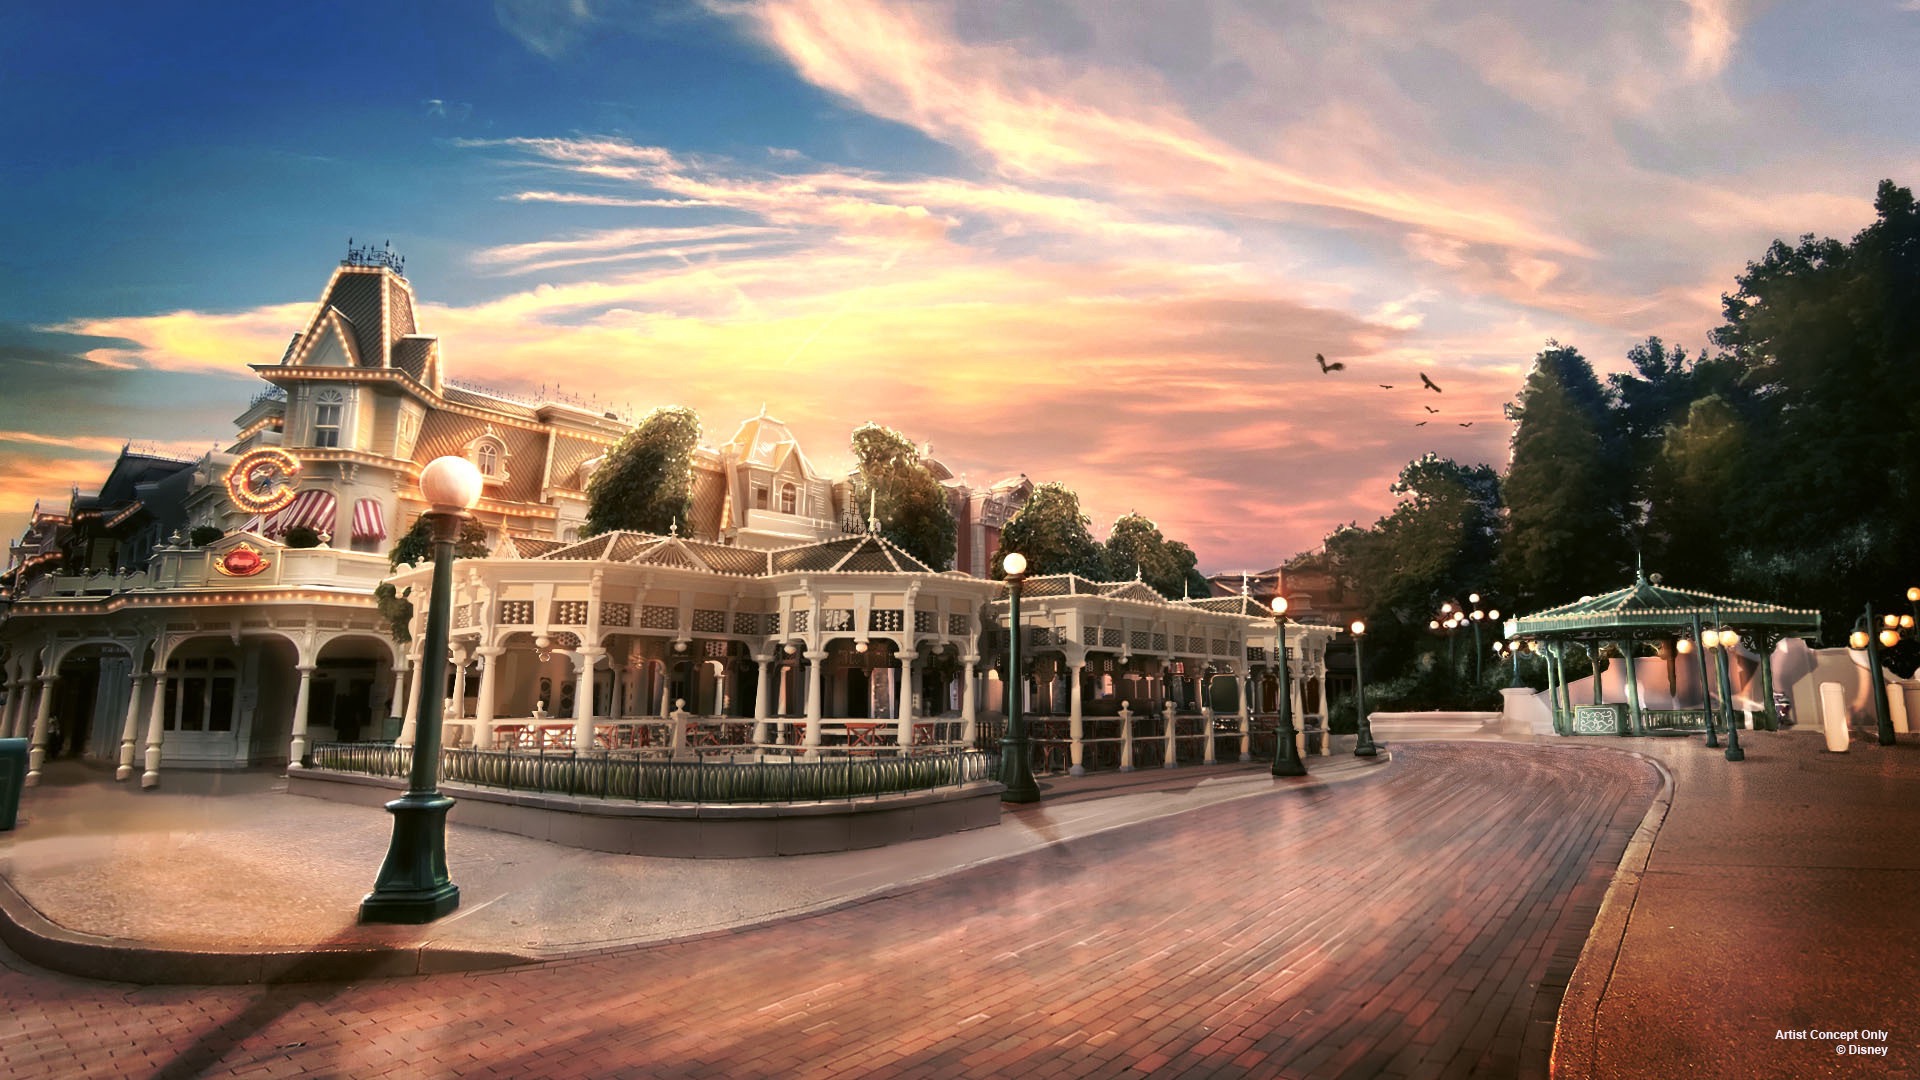 Disneyland Paris launches weatherproofing plan to protect guests from the Weather Conditions.